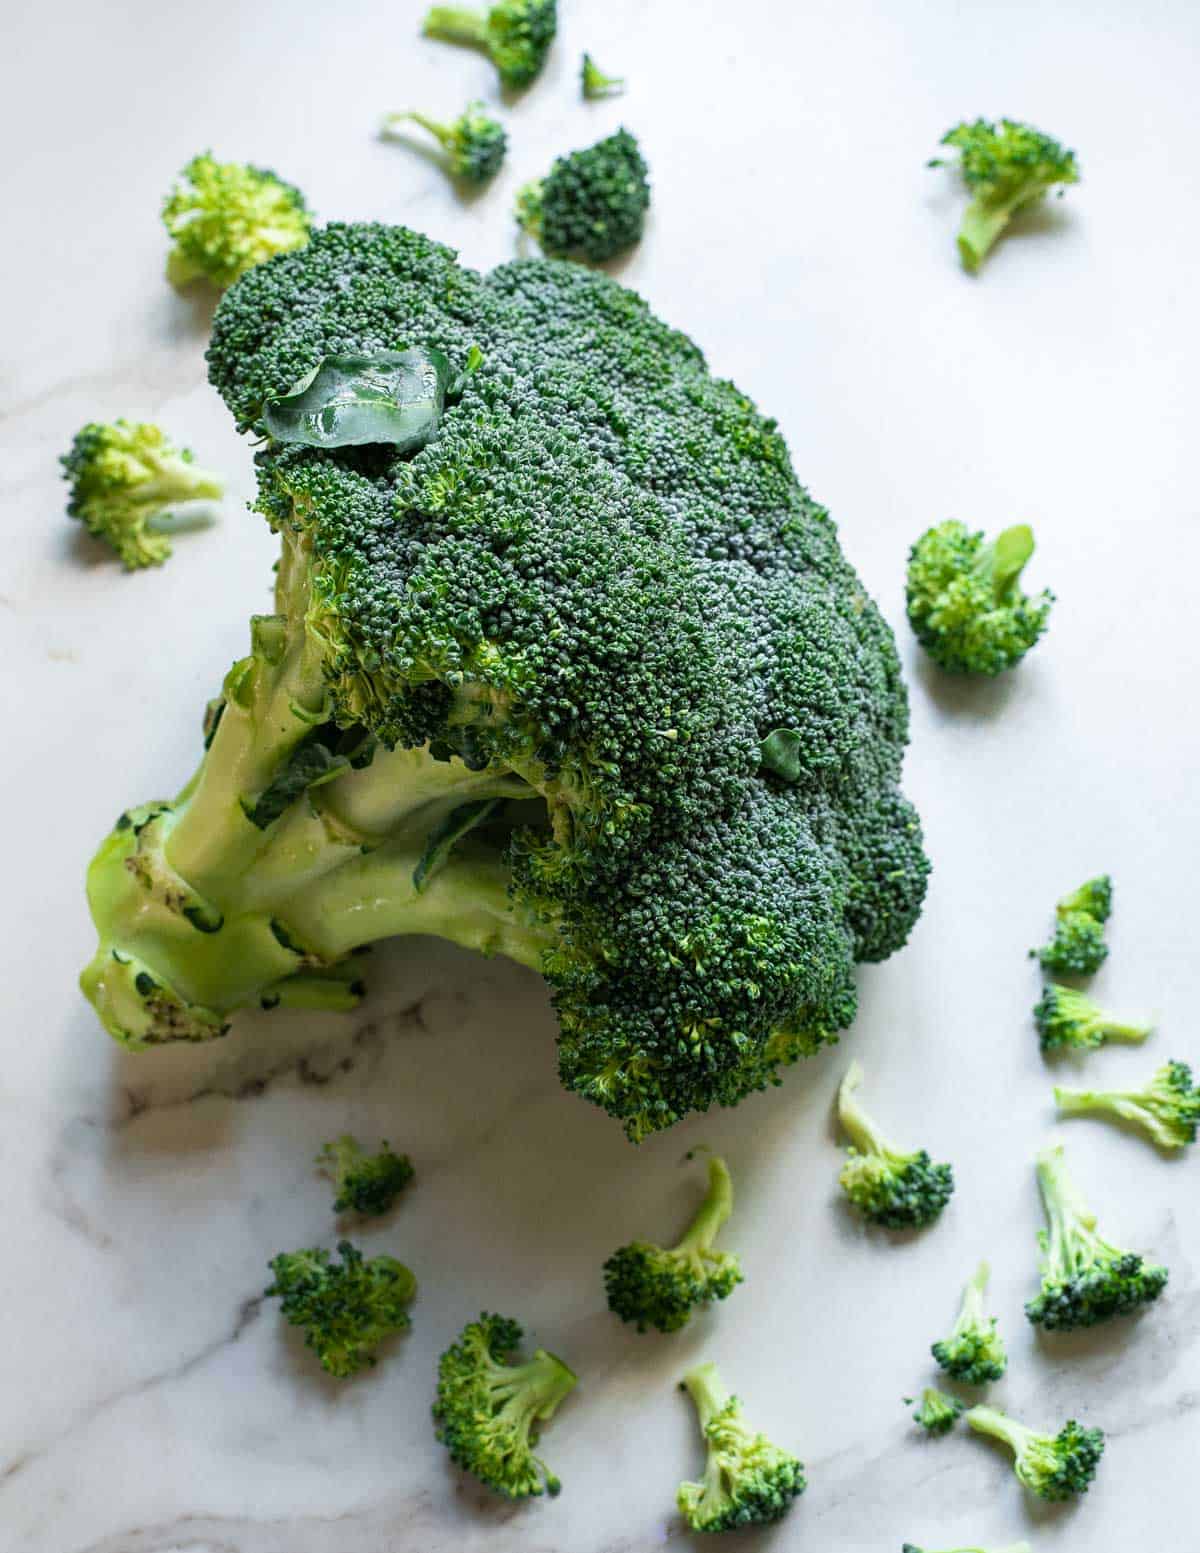 A large head of broccoli on a white surface.